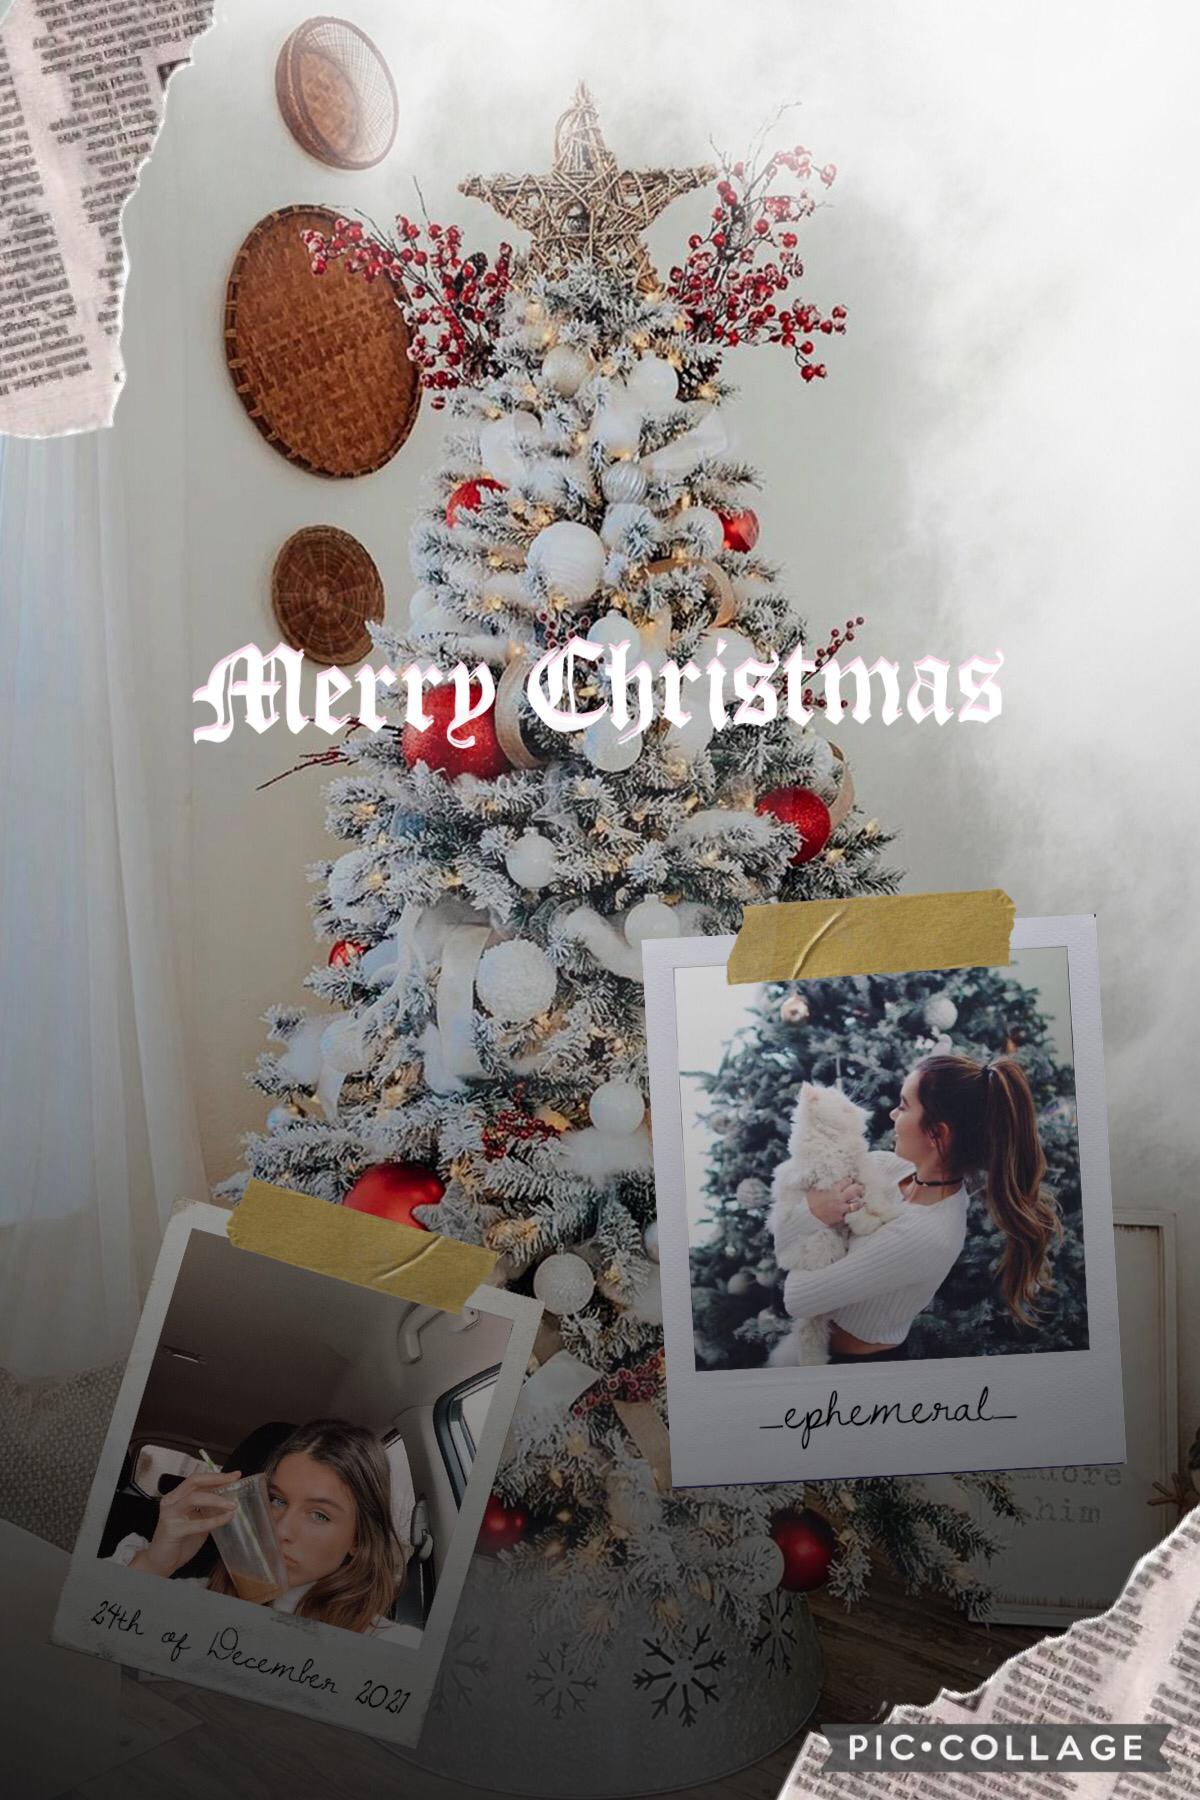 Tap

Hello there! I wish you a very merry Christmas! -Ephemeral 